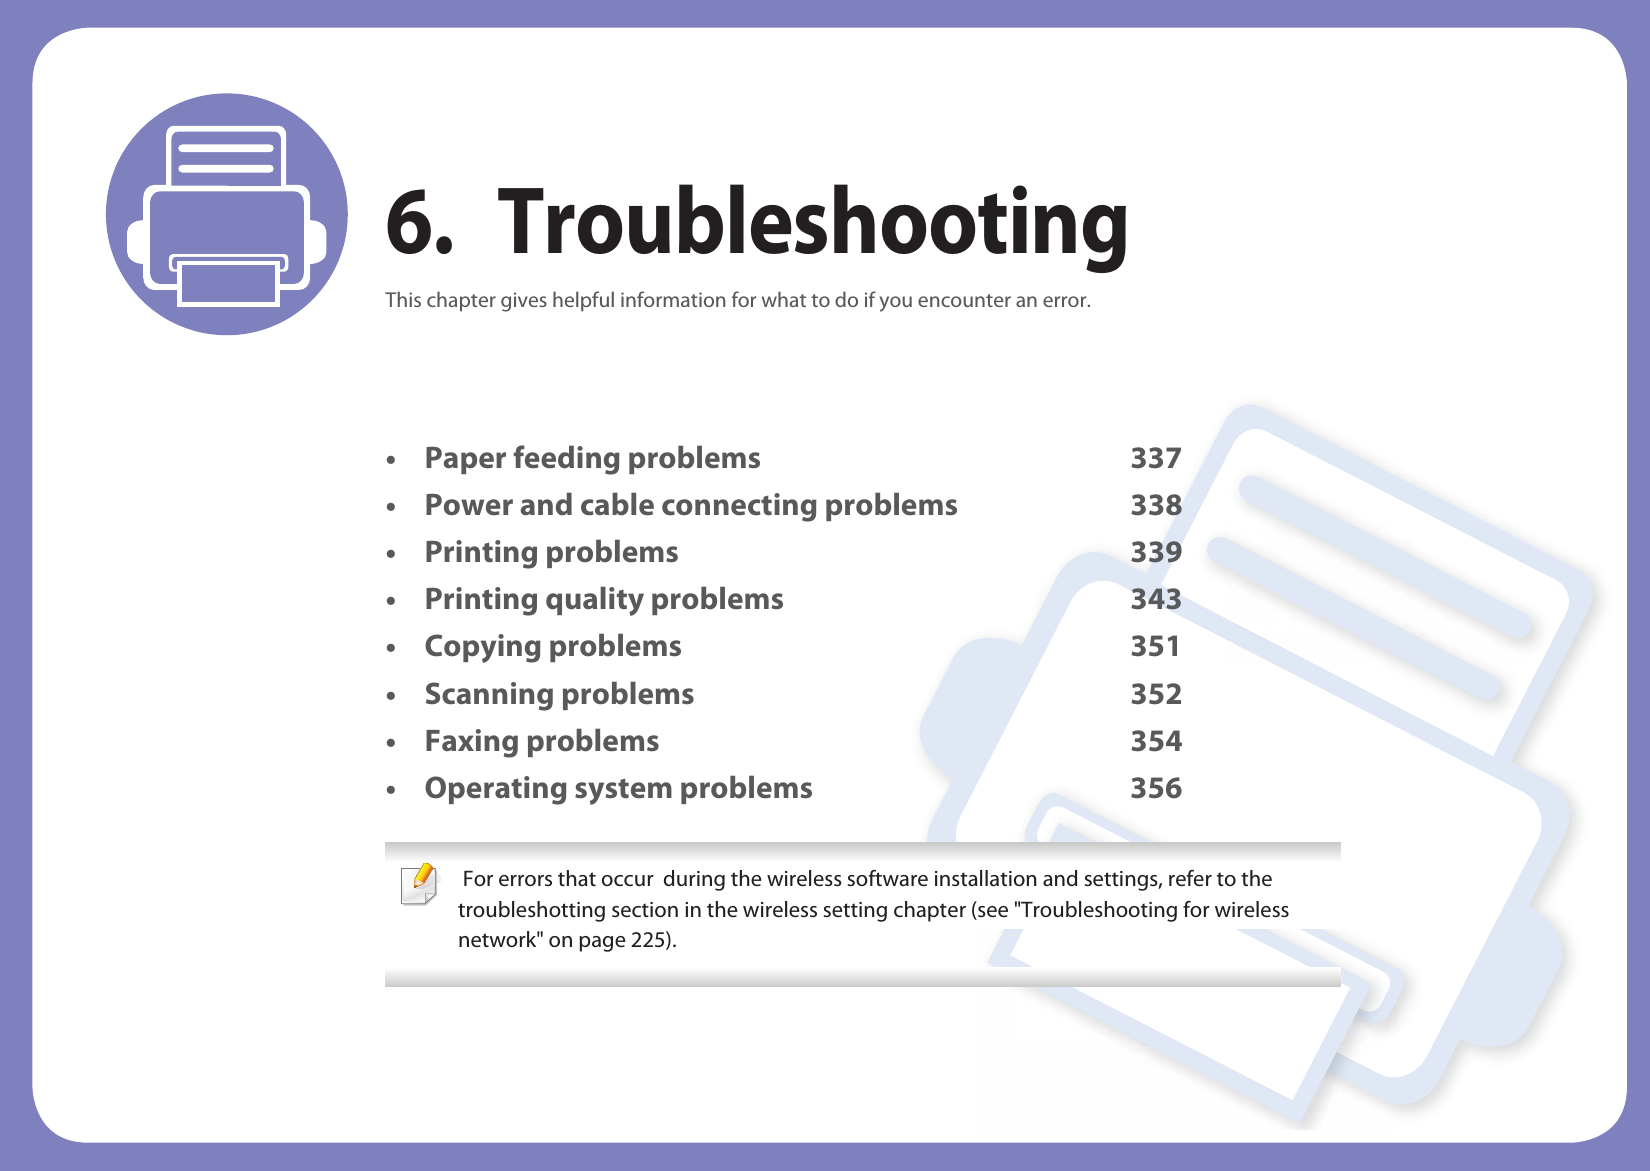 6. TroubleshootingThis chapter gives helpful information for what to do if you encounter an error.• Paper feeding problems 337• Power and cable connecting problems 338• Printing problems 339• Printing quality problems 343• Copying problems 351• Scanning problems 352• Faxing problems 354• Operating system problems 356  For errors that occur  during the wireless software installation and settings, refer to the troubleshotting section in the wireless setting chapter (see &quot;Troubleshooting for wireless network&quot; on page 225). 